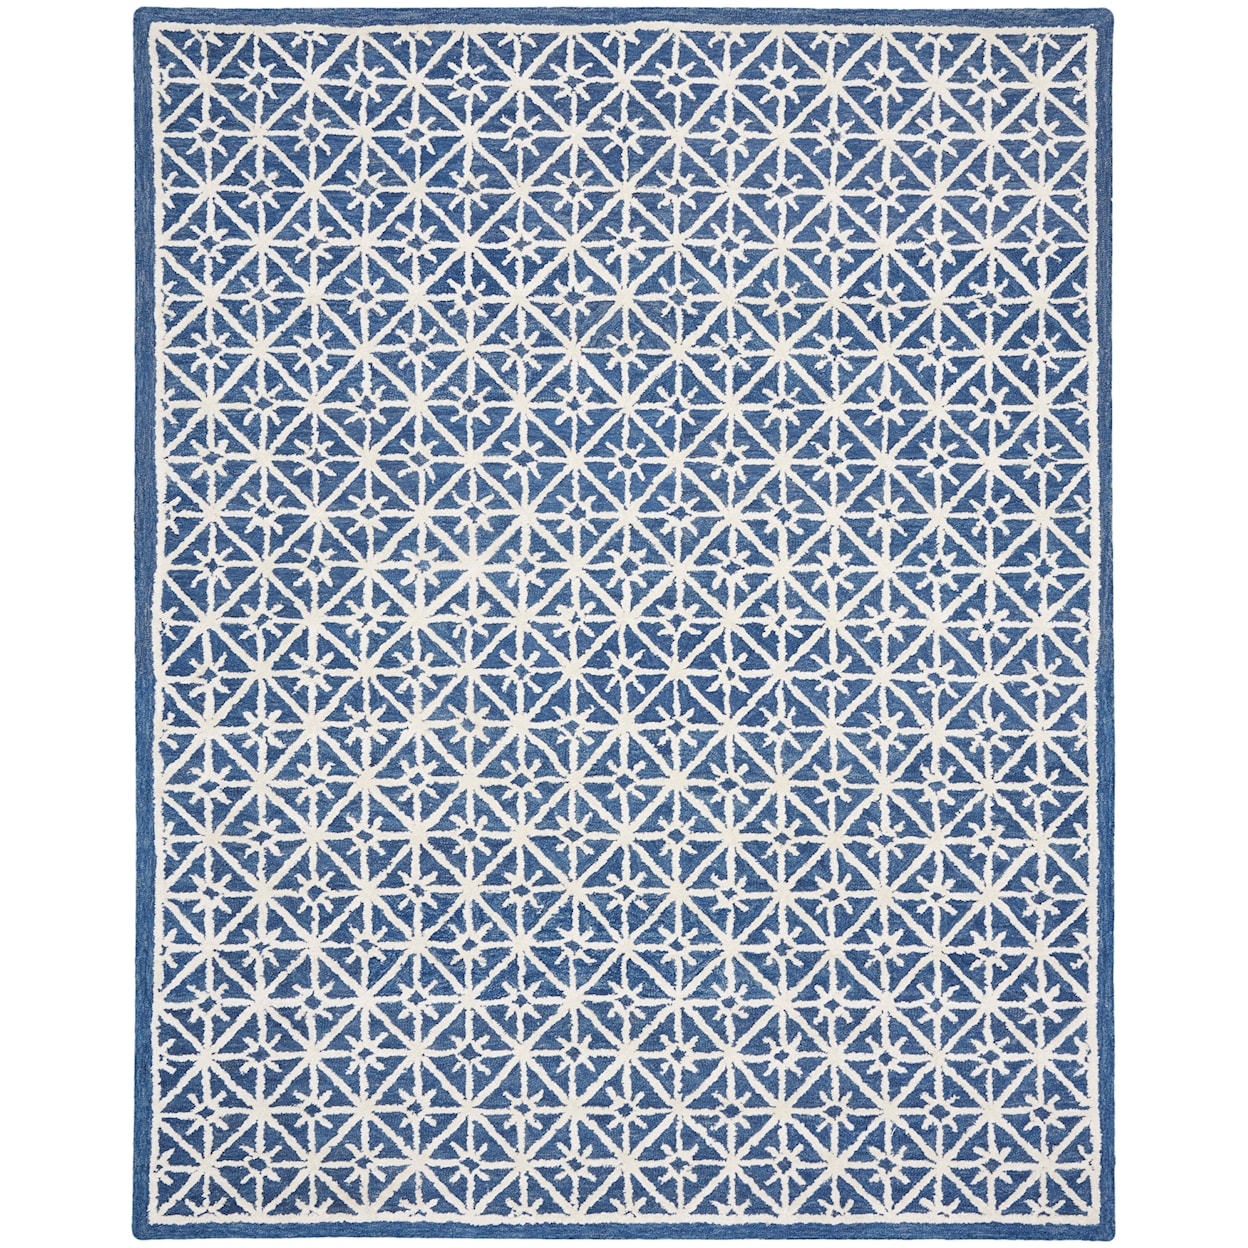 57 Grand By Nicole Curtis Series 2 8'6" x 11'6"  Rug